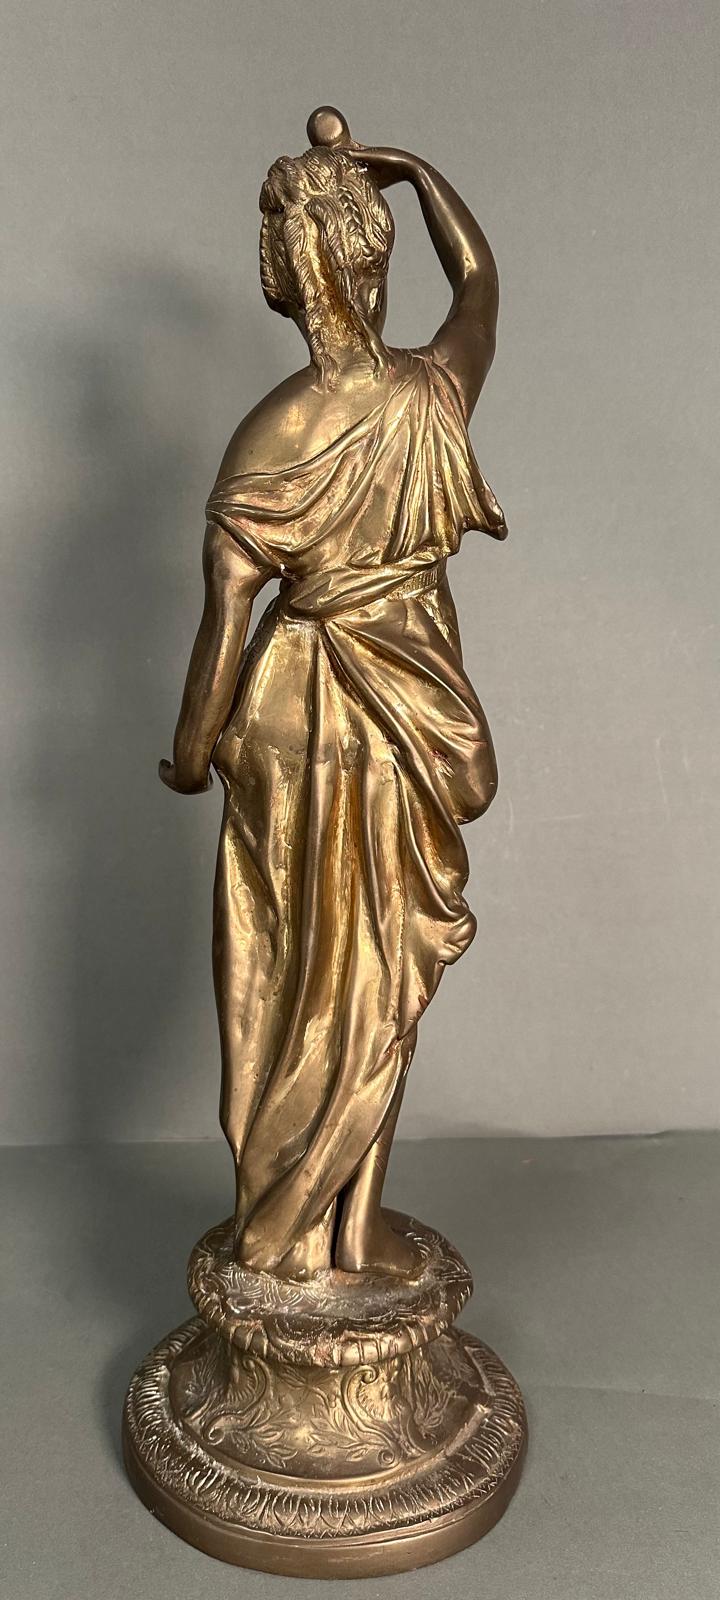 A brass sculpture of the Goddess Thetis, Goddess of the Sea in the classical pose (H57cm) - Image 2 of 5